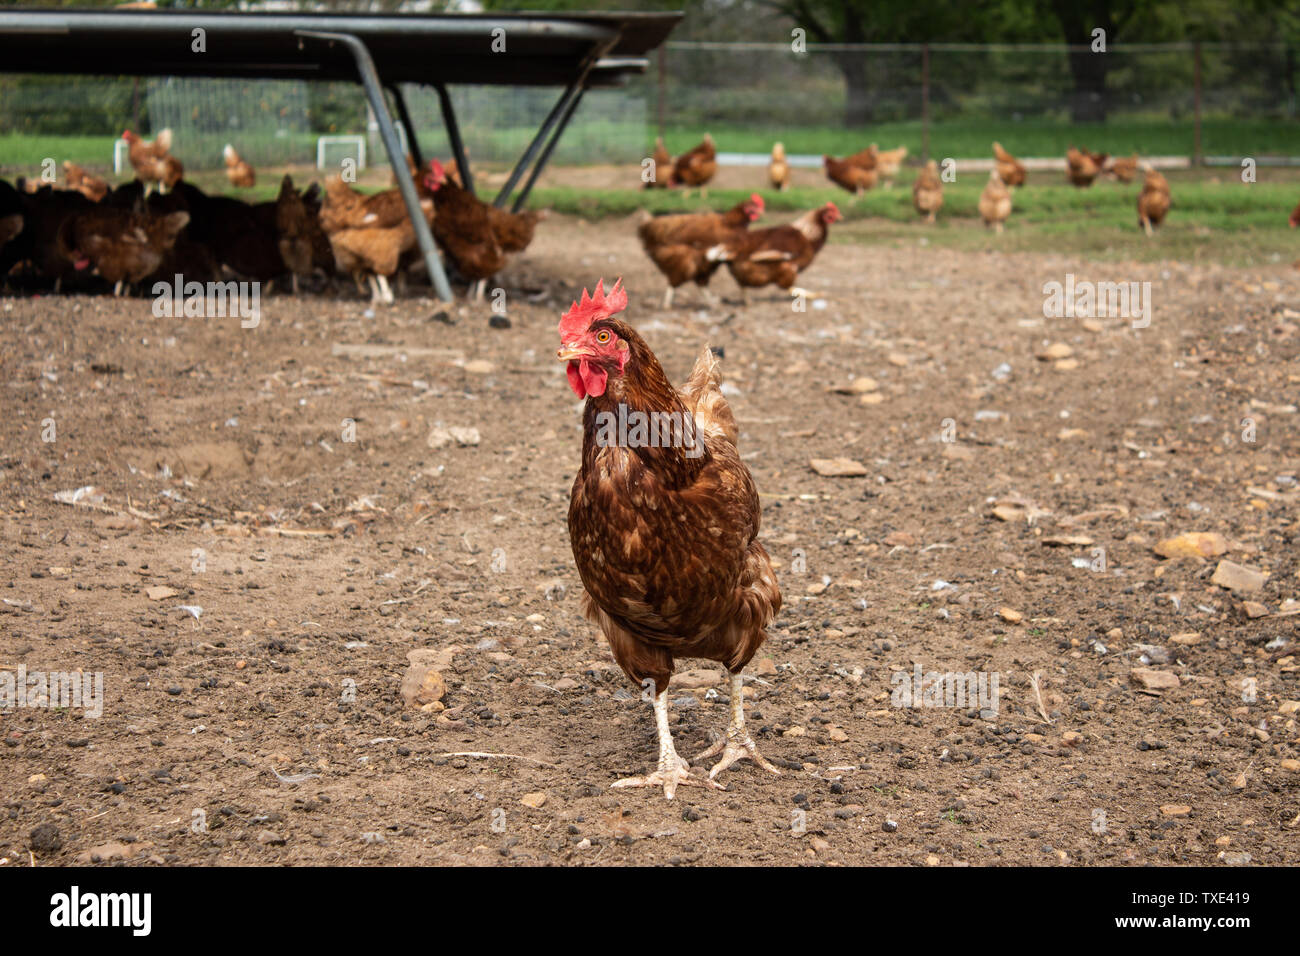 Free range Isa Brown chicken farm showing hen scratching in dirt with many chickens in background Stock Photo